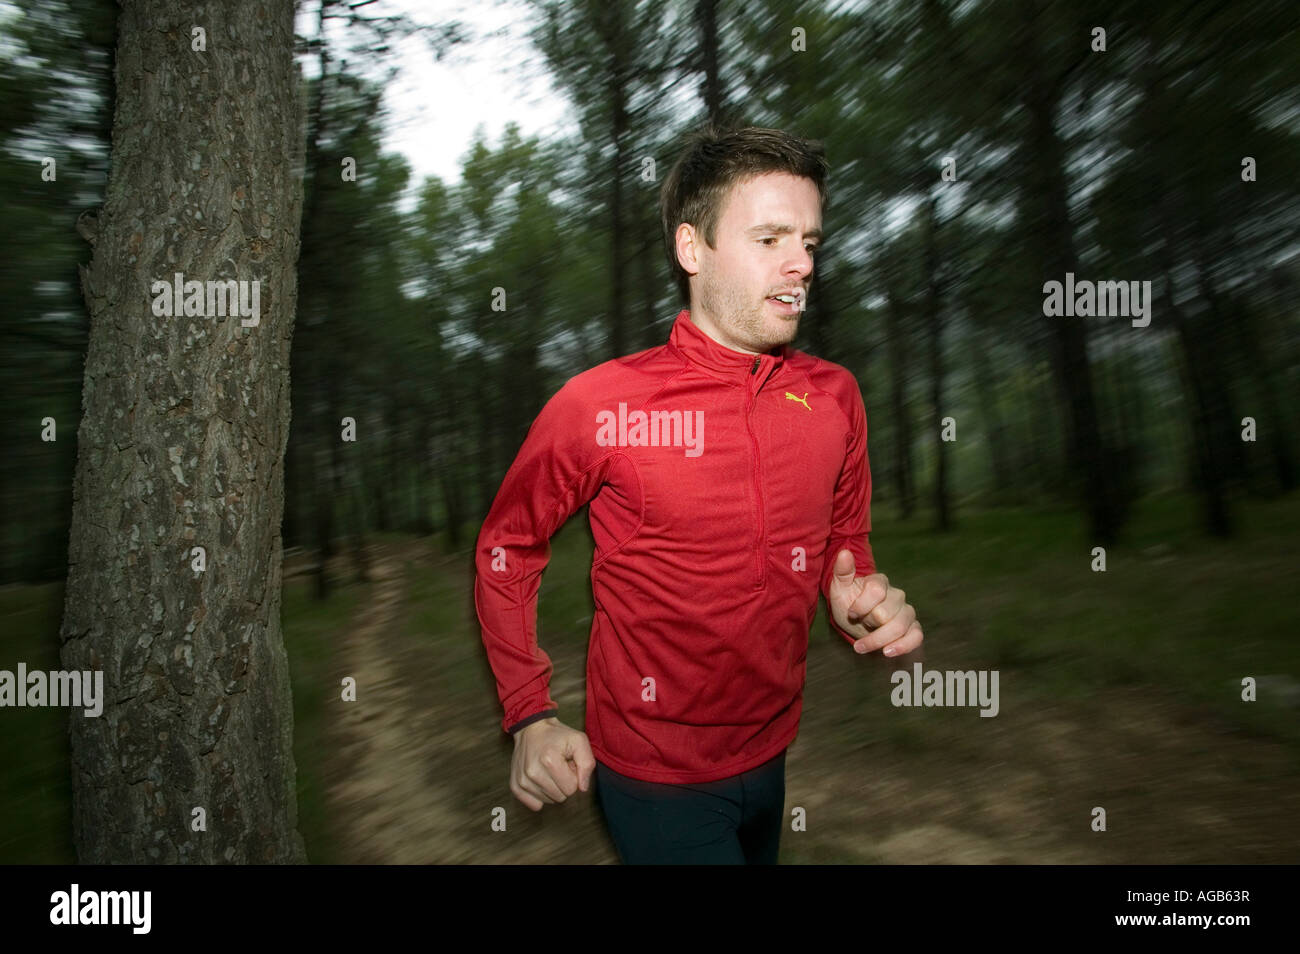 Male runner on forest trail Stock Photo